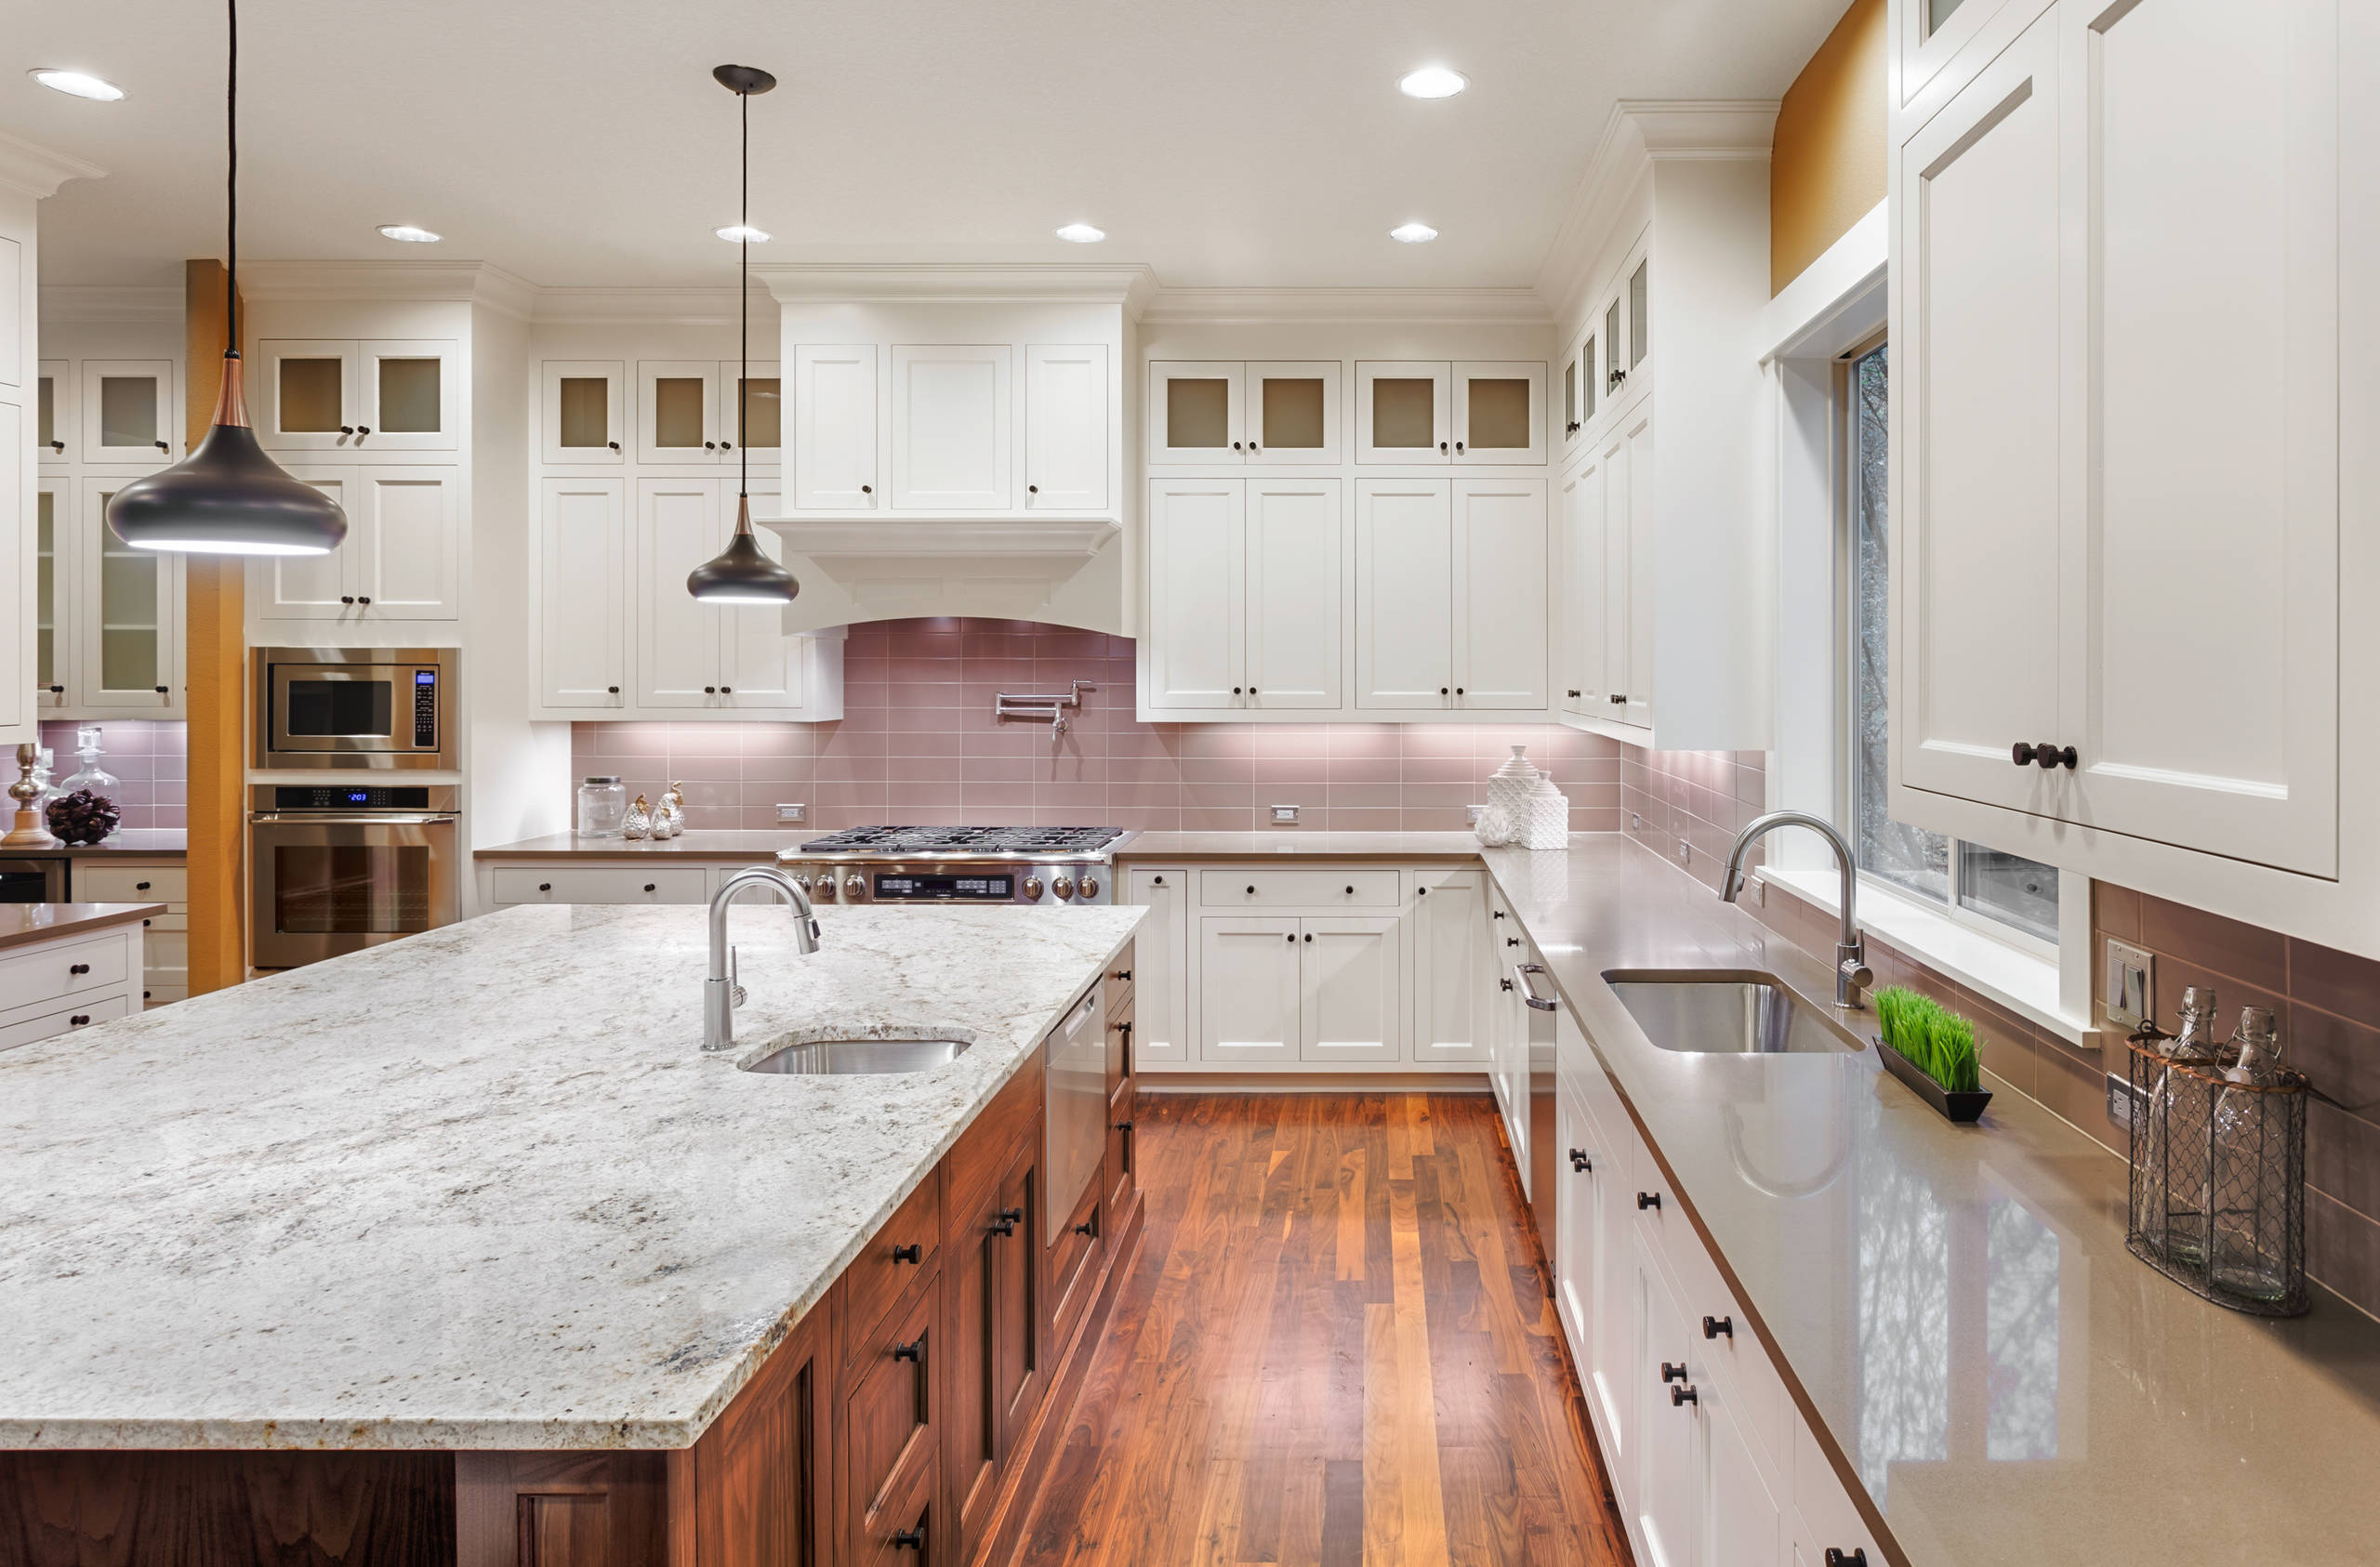 Kitchen Mill Valley - Full kitchen remodeling